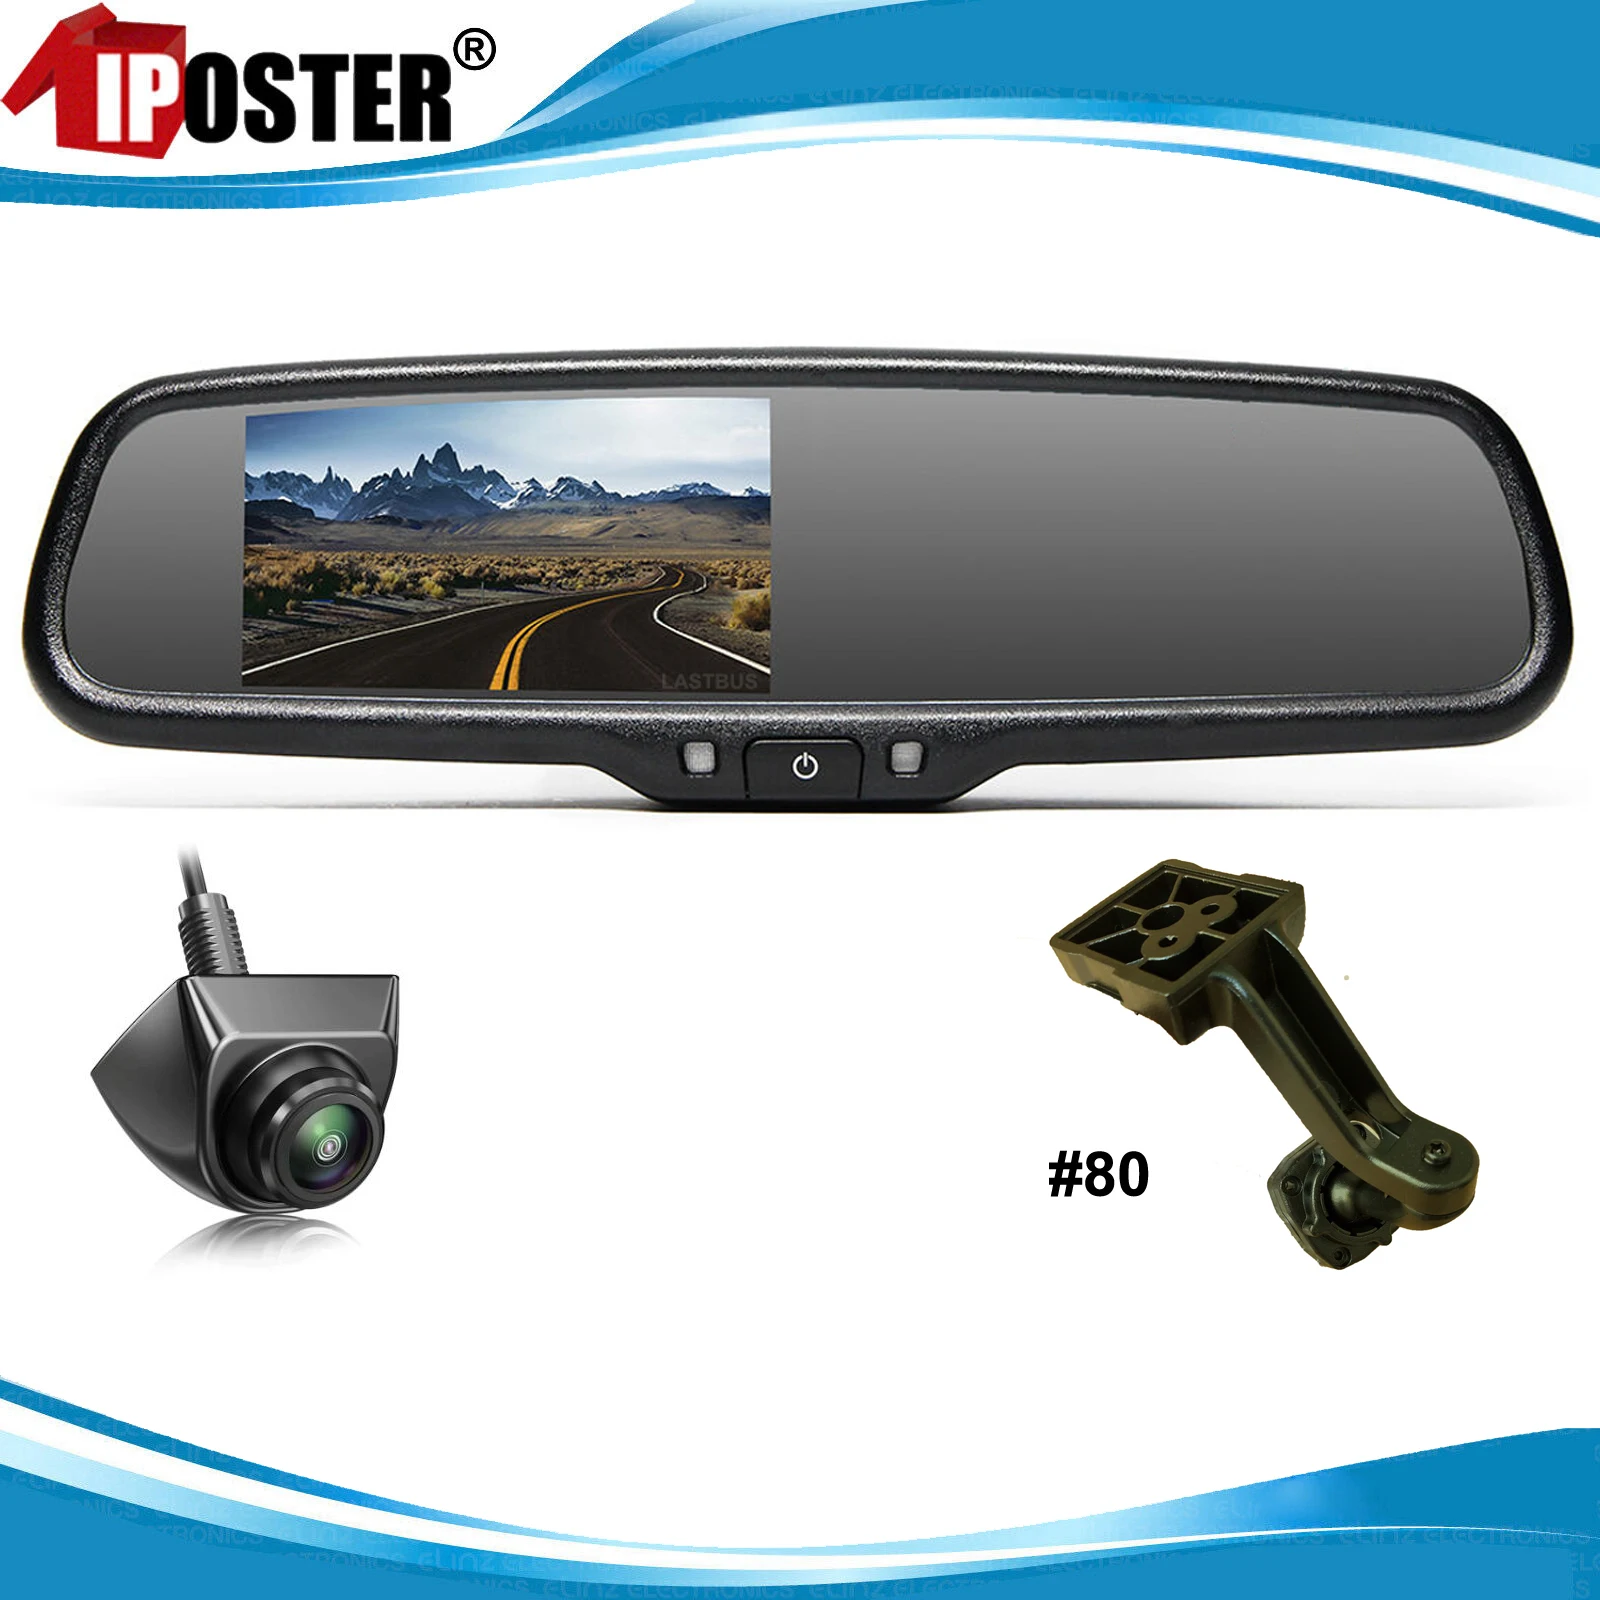 iposter-43-inch-car-rear-view-mirror-monitor-with-no80-bracket-fisheye-lens-backup-reverse-camera-for-totyota-land-cruiser